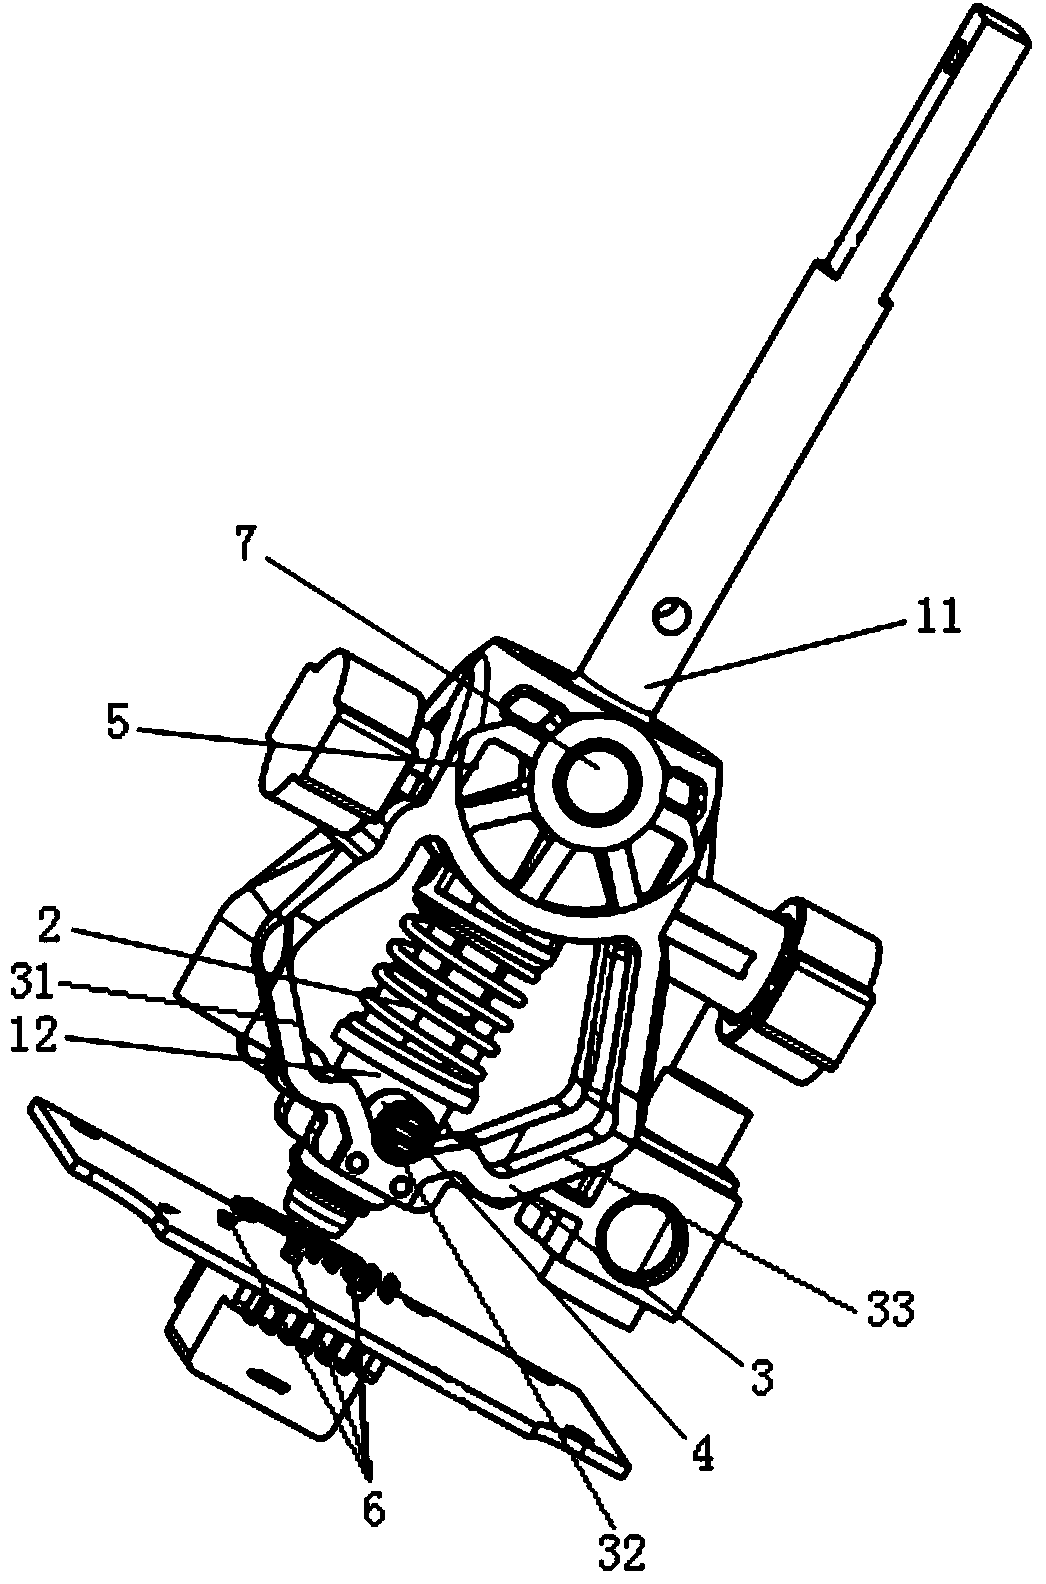 Electric vehicle and return shift operating device